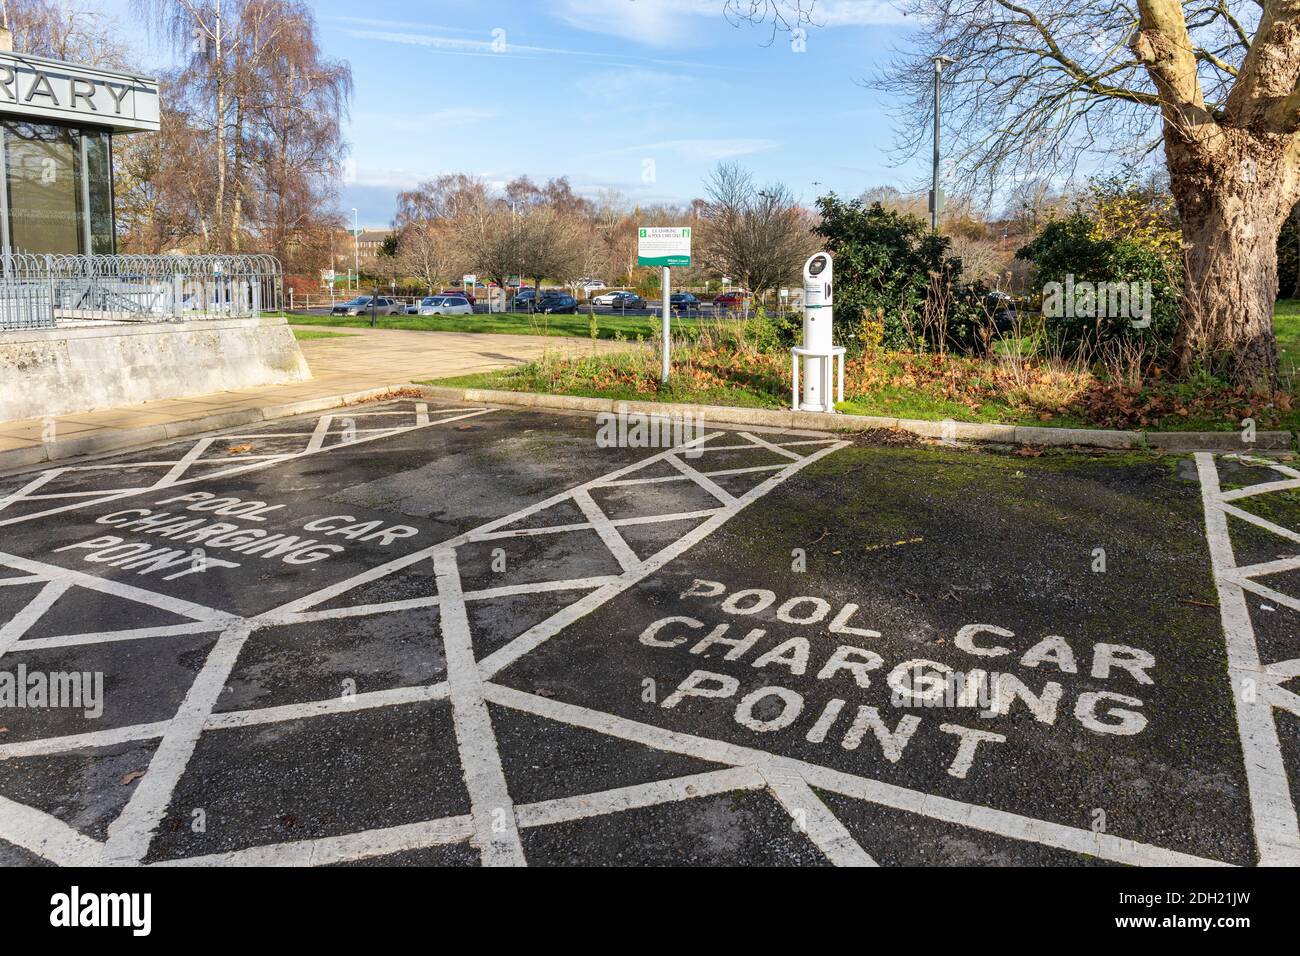 Wiltshire County Council pool car charging point parking bays. Bp pulse EV charging network, Trowbridge, Wiltshire, England, UK Stock Photo